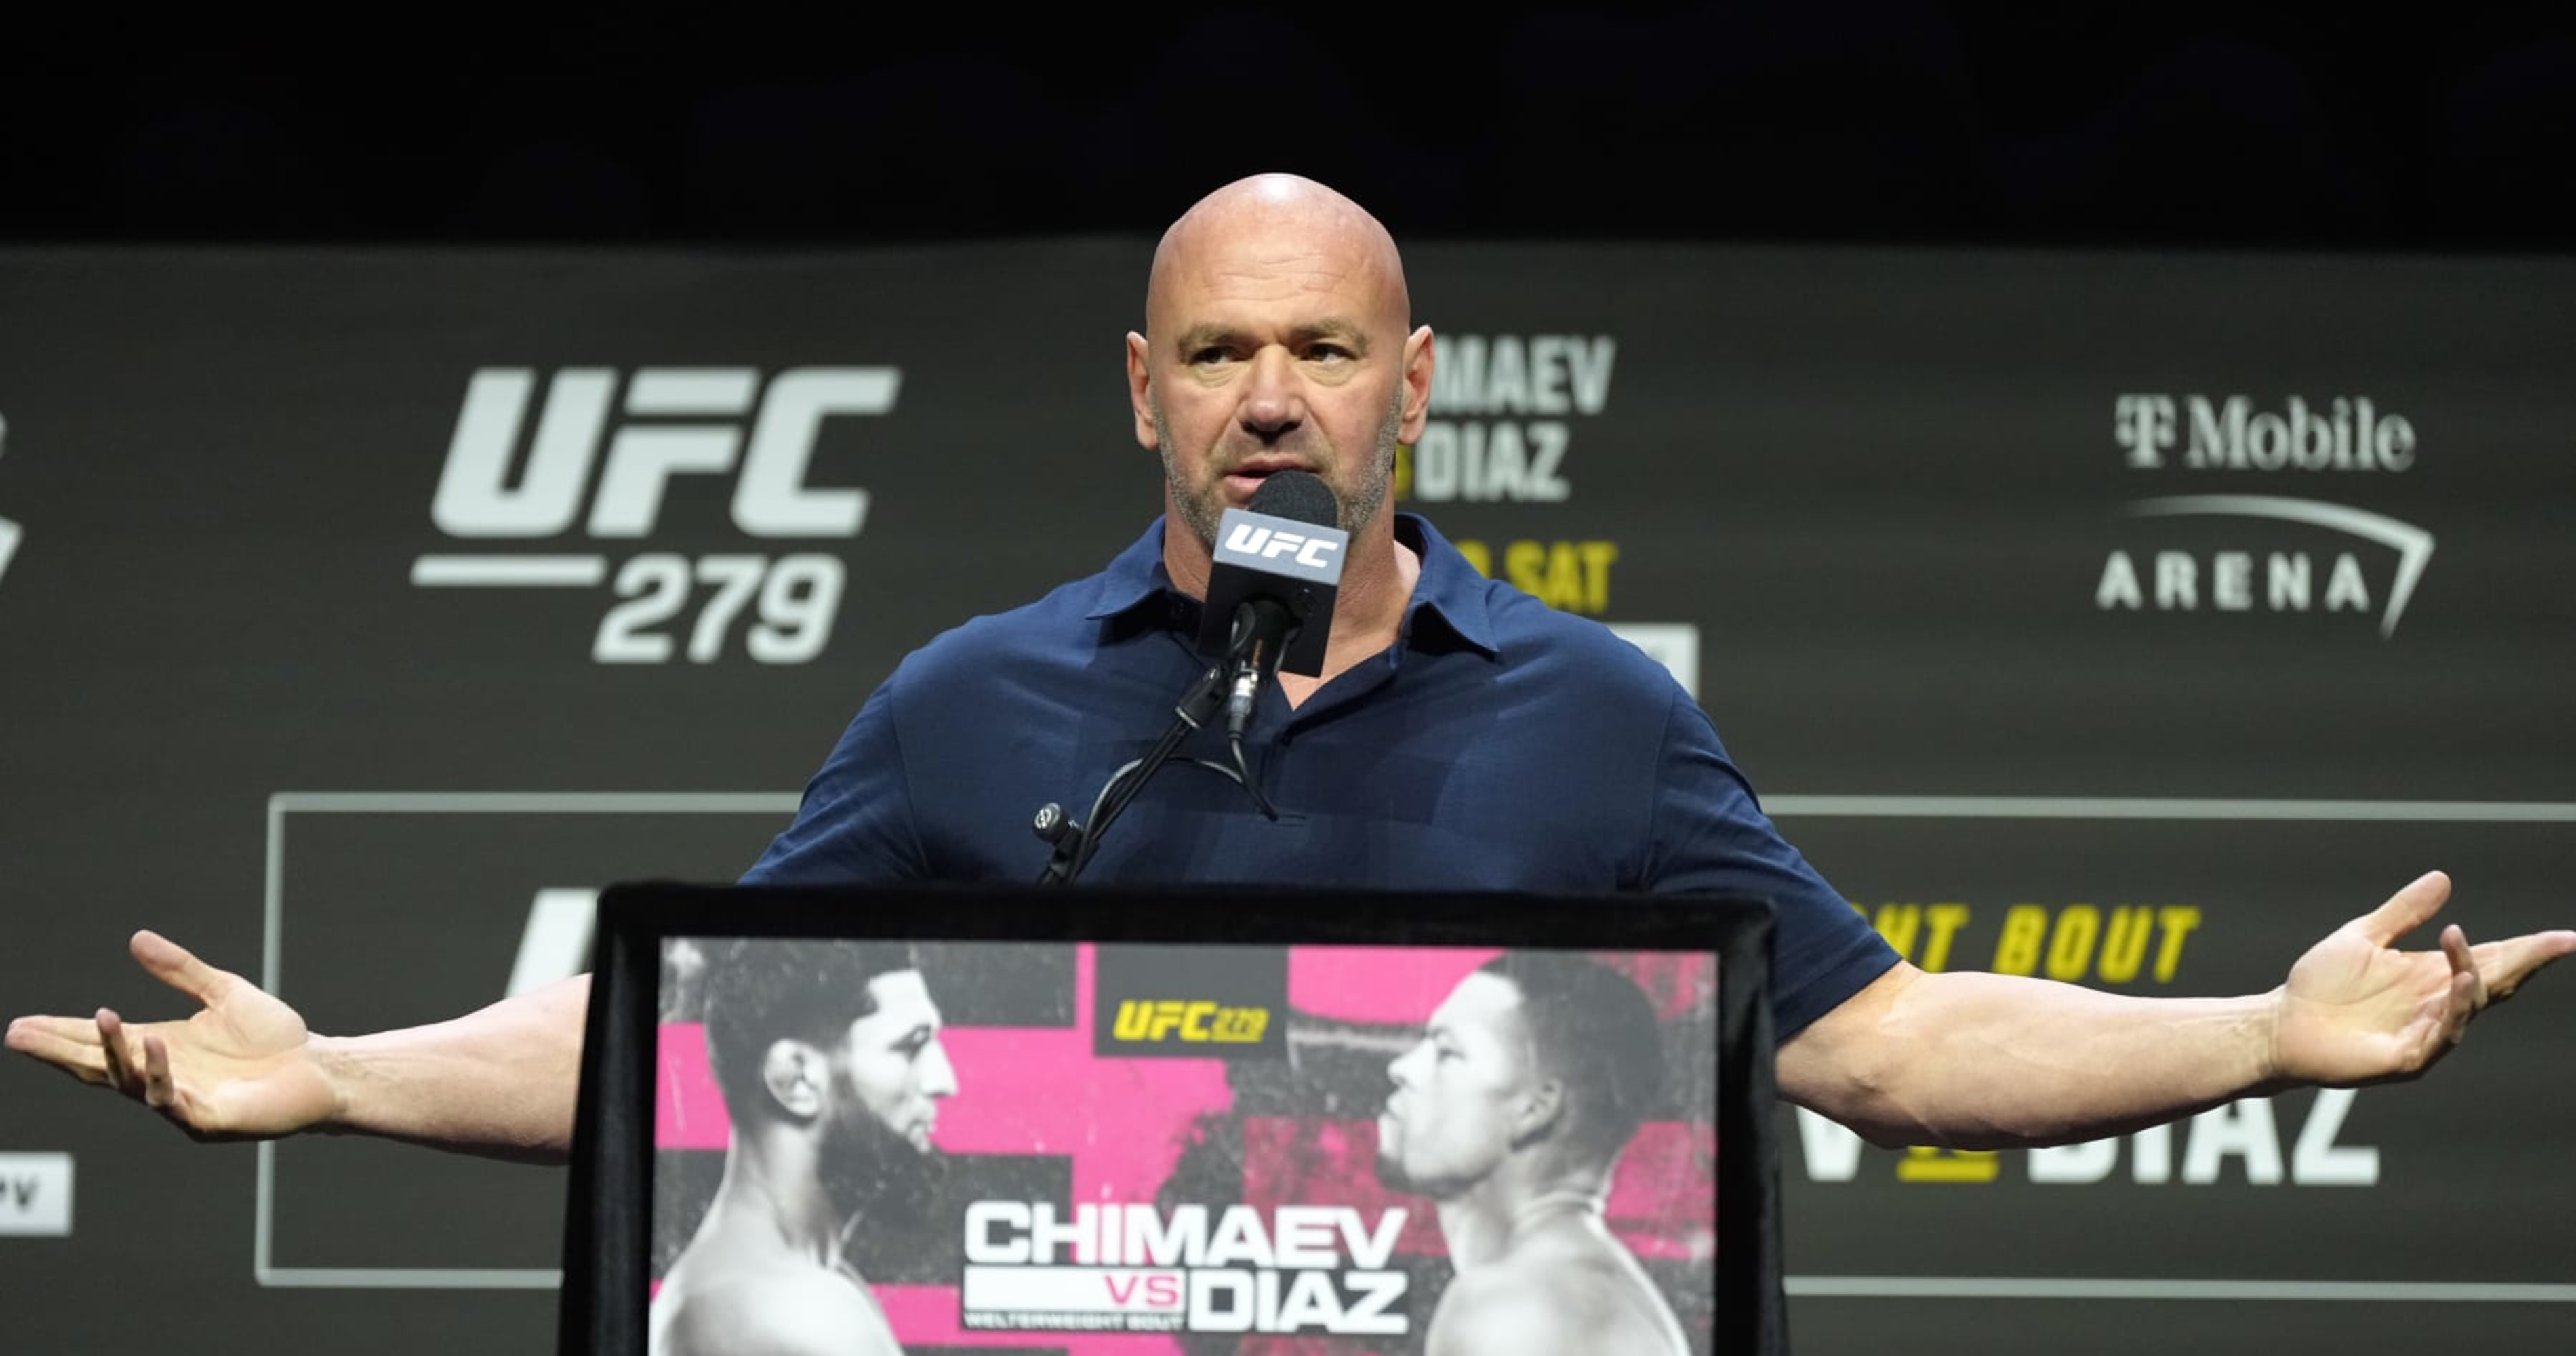 Dana White Cancels Ufc 279 Press Conference After S T Show Altercation Backstage News 